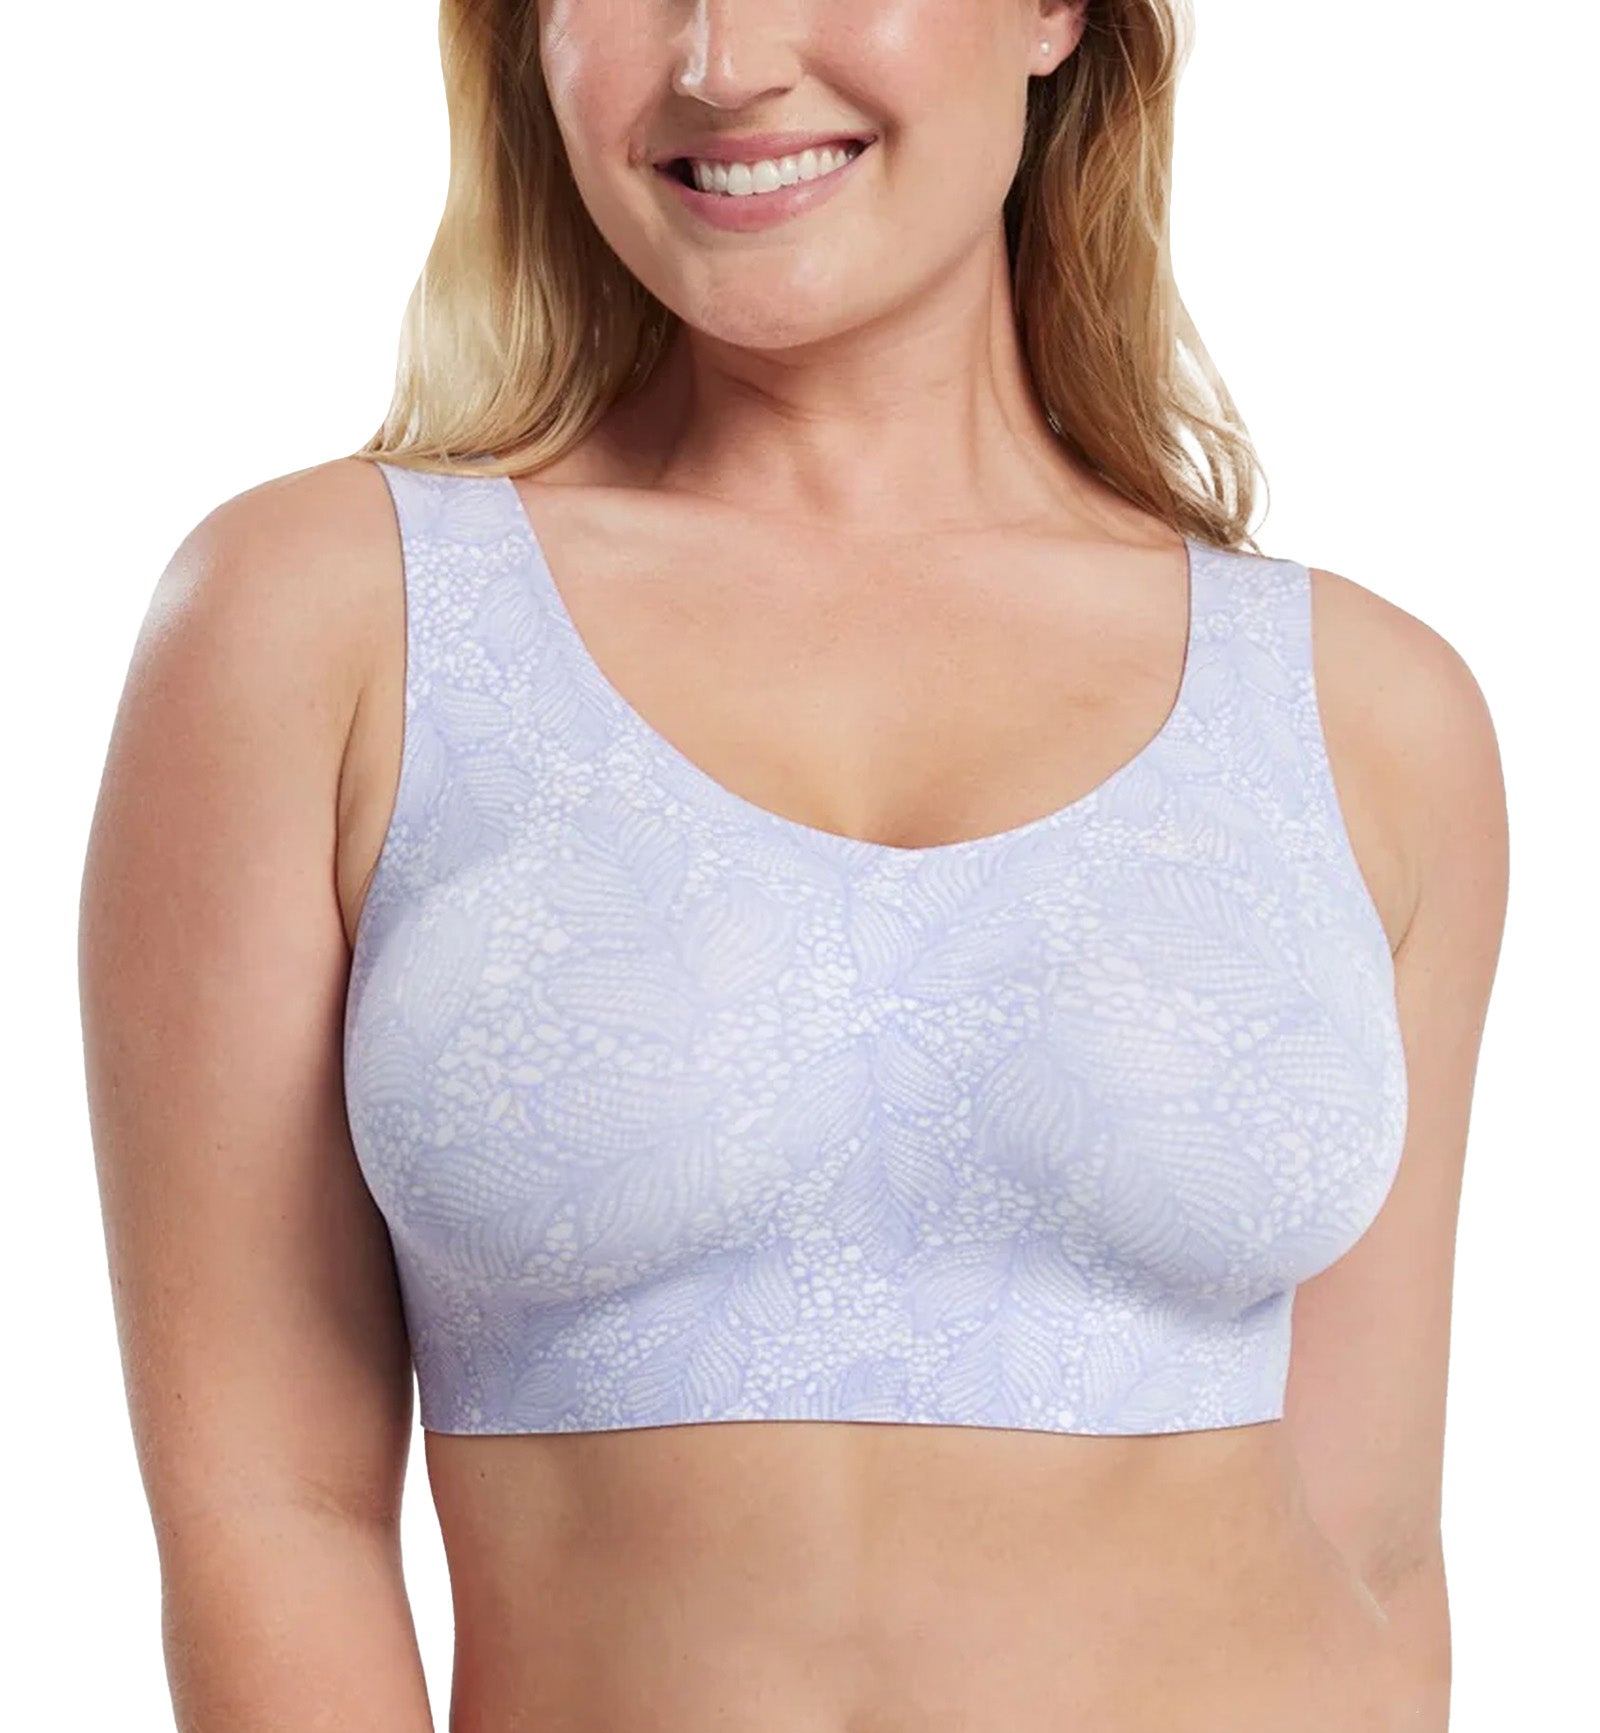 Evelyn & Bobbie DEFY V-Neck Bralette w/ Removable Pads (1728﻿),Small,Moonstone Lace - Moonstone Lace,Small